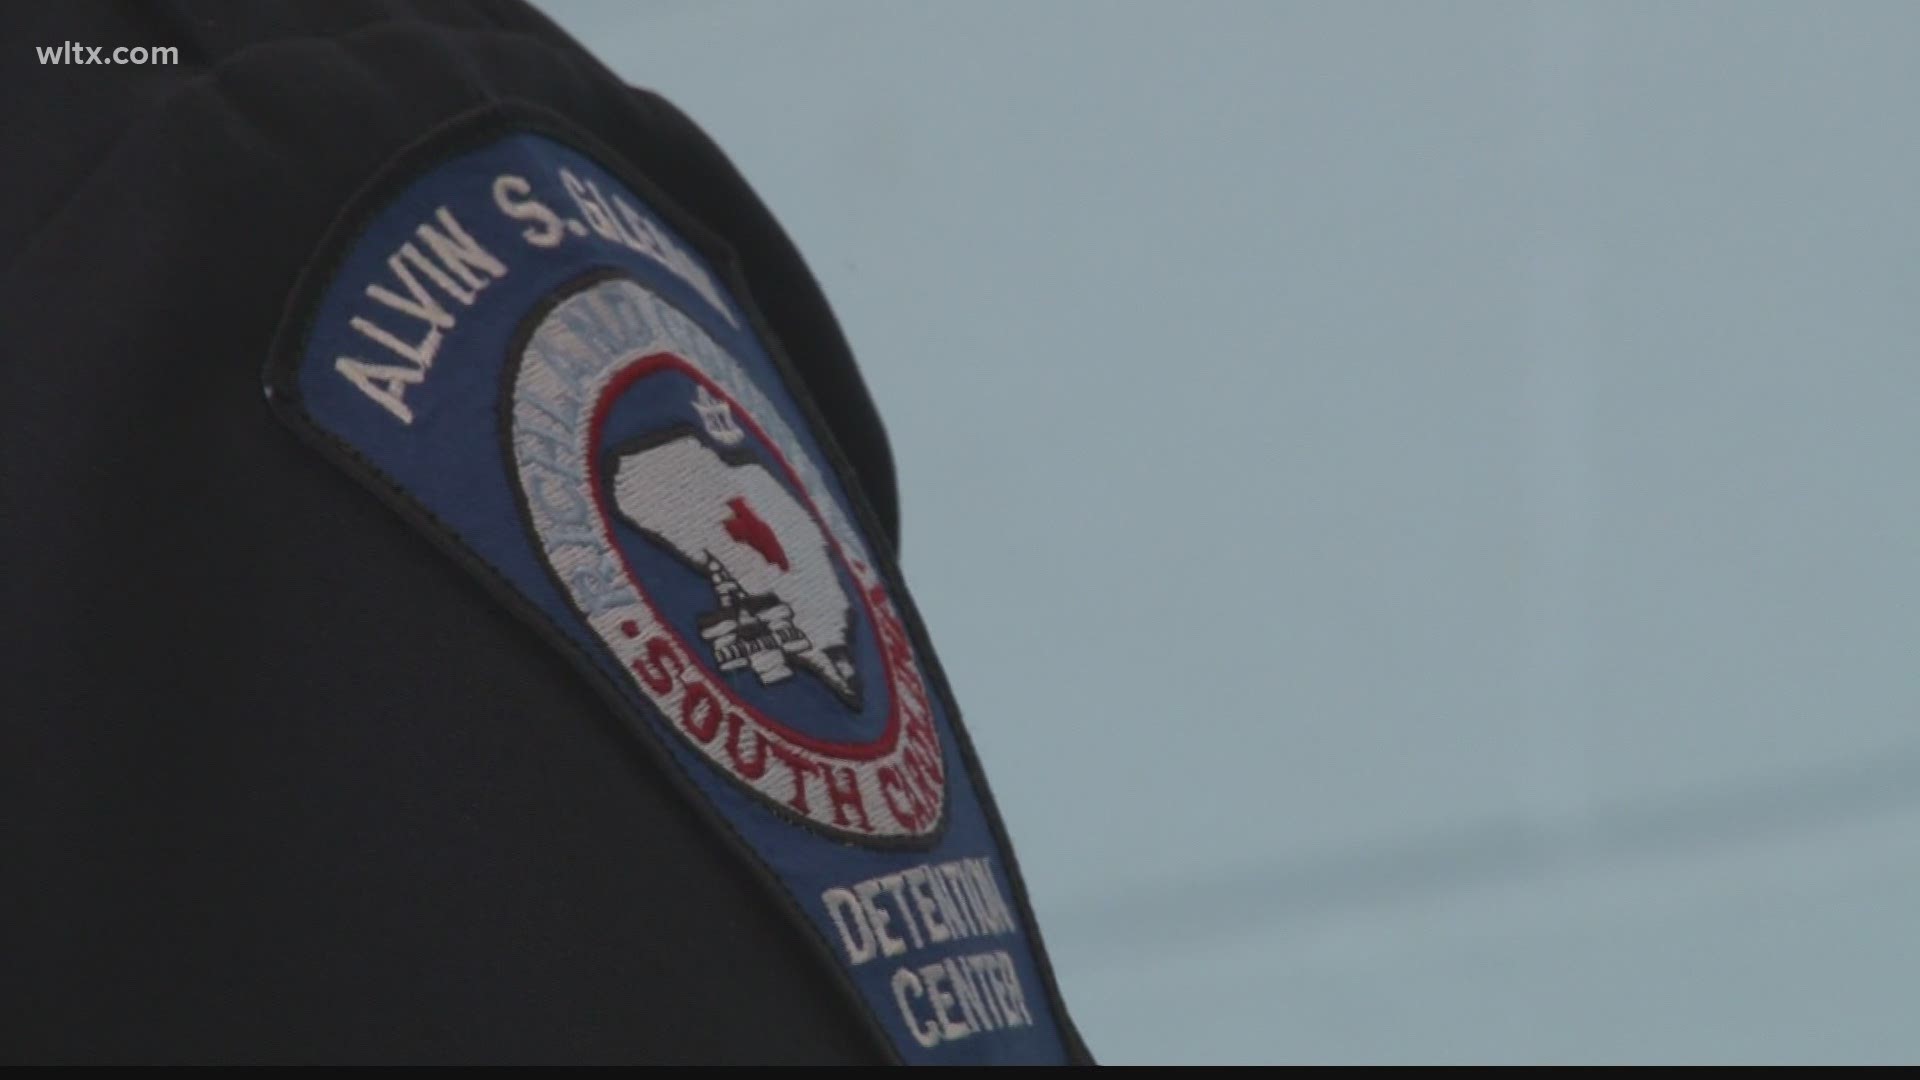 Richland County Council is hoping to increase pay for detention officers at the Richland County jail to help retain and attract corrections officers.